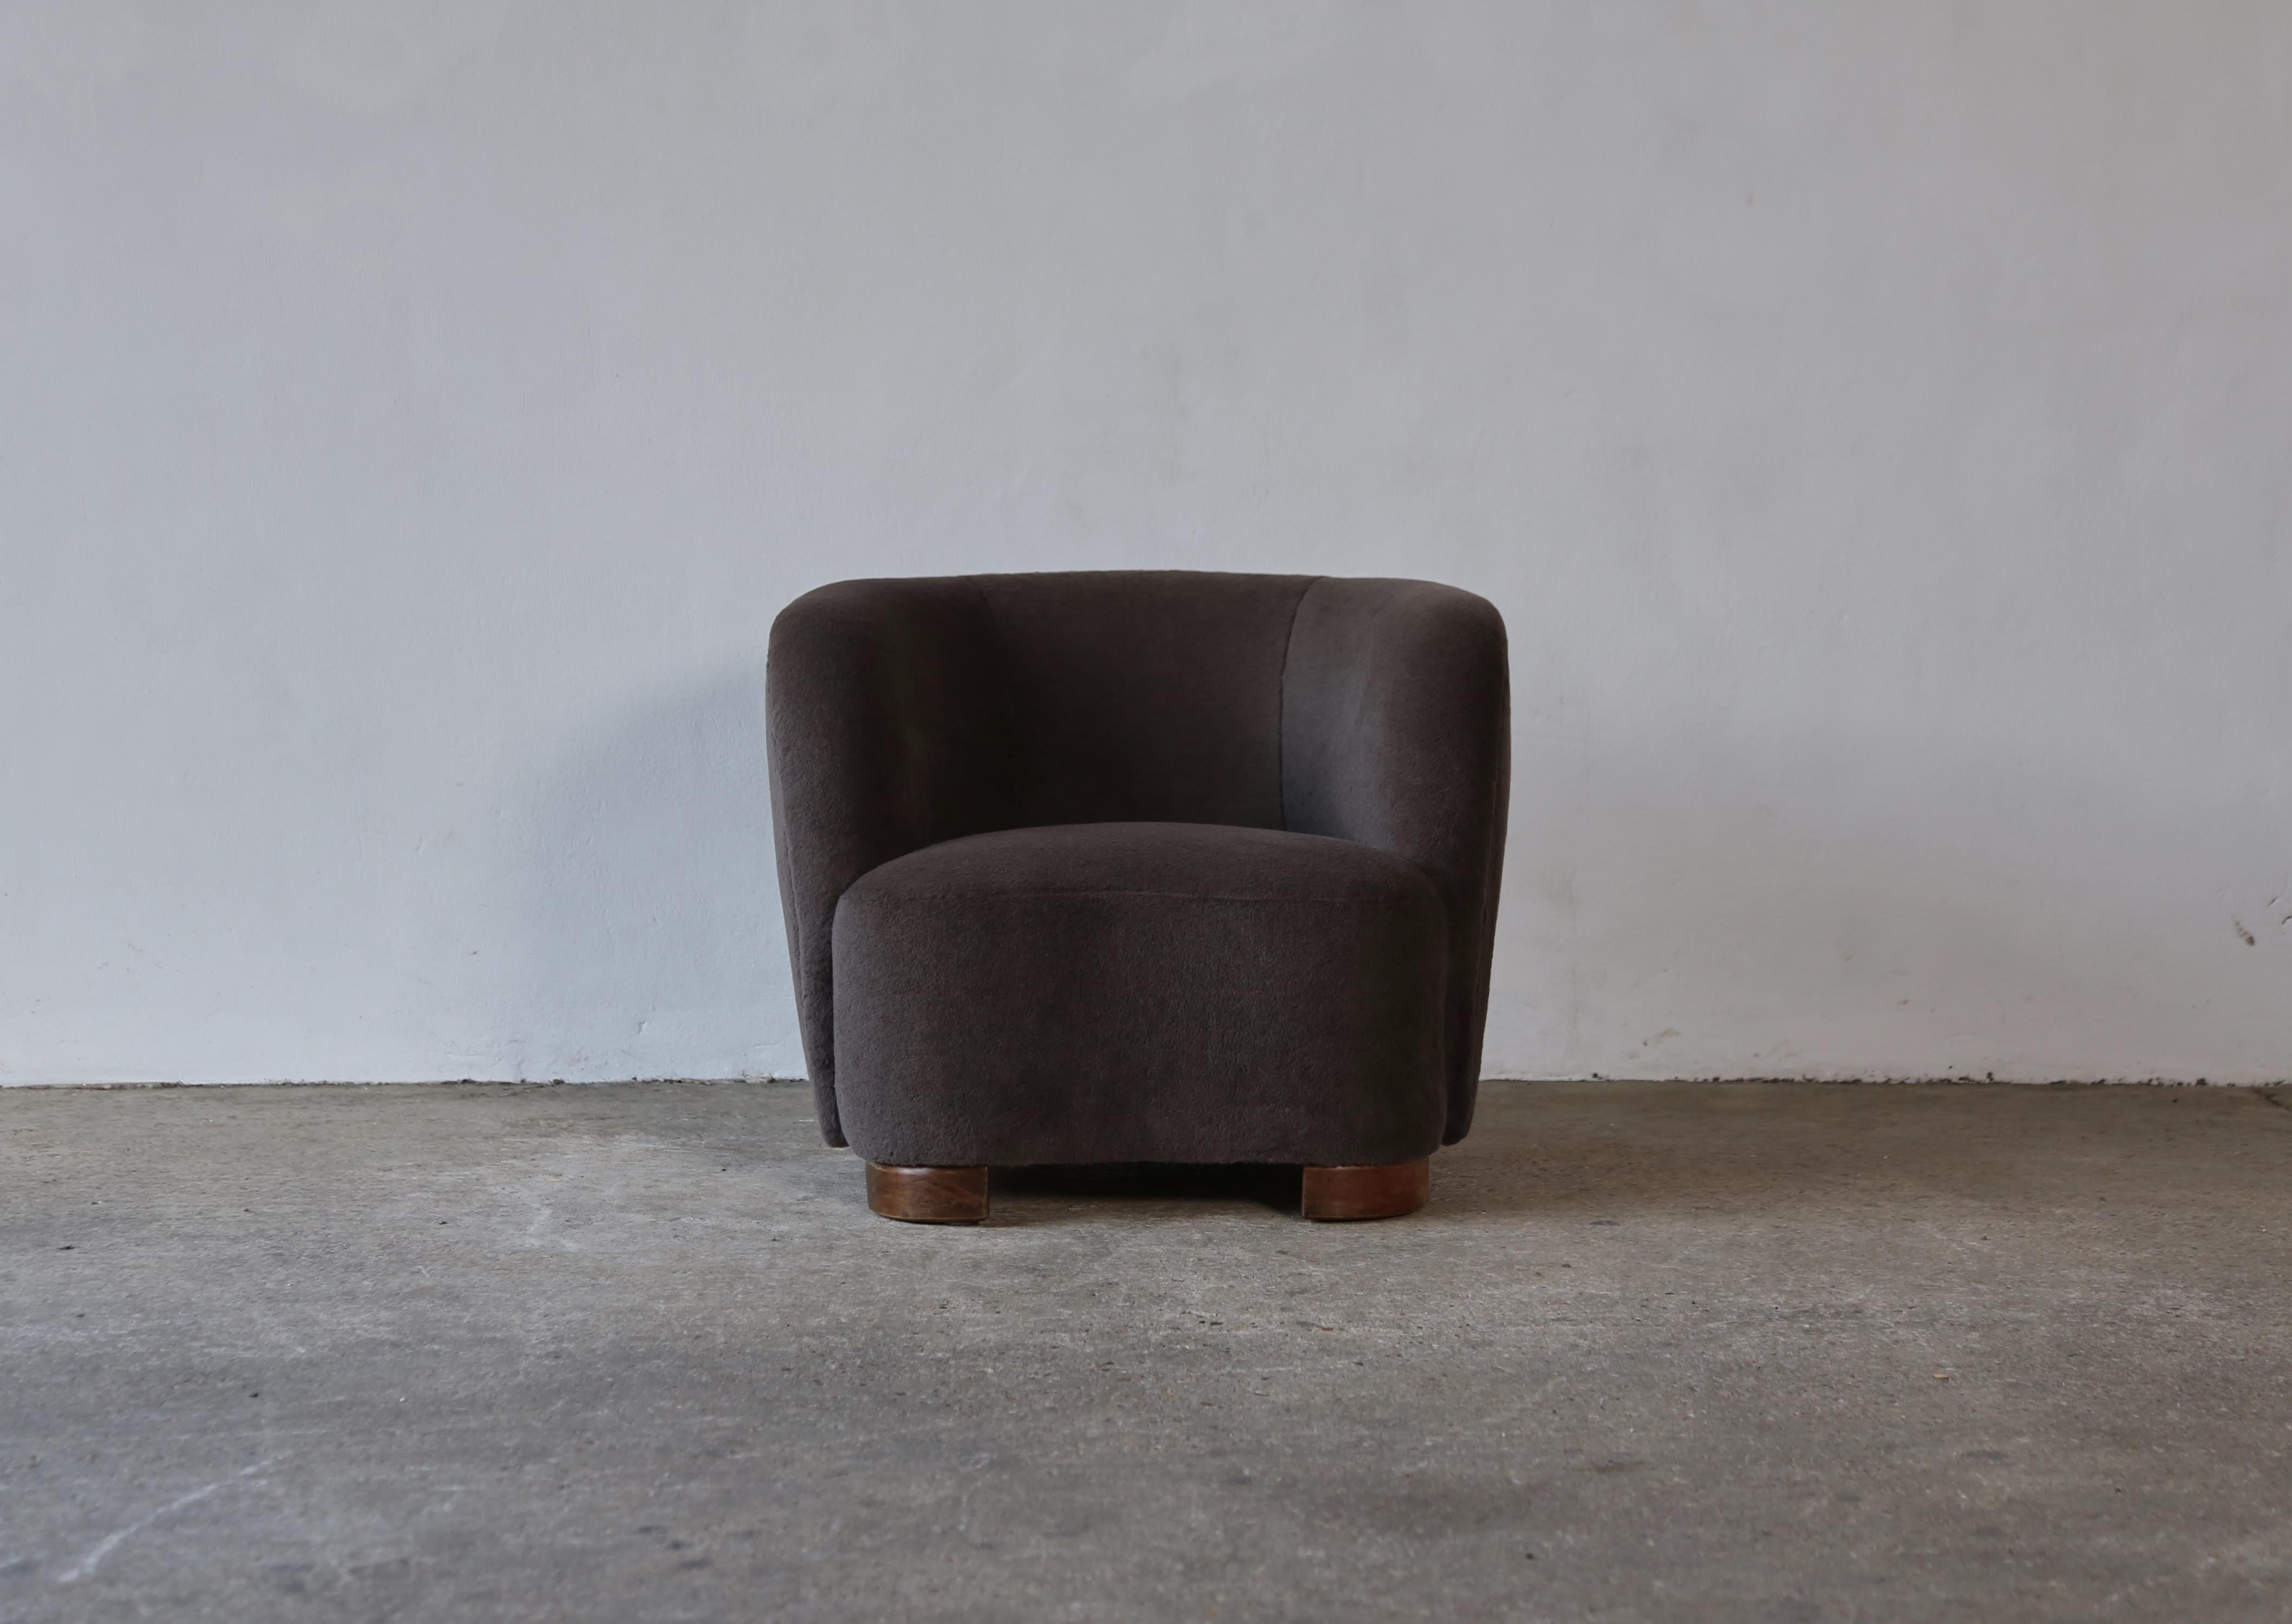 Mid-Century Modern Cabinetmaker Lounge Chair, Denmark, 1940s, Newly Upholstered in Alpaca